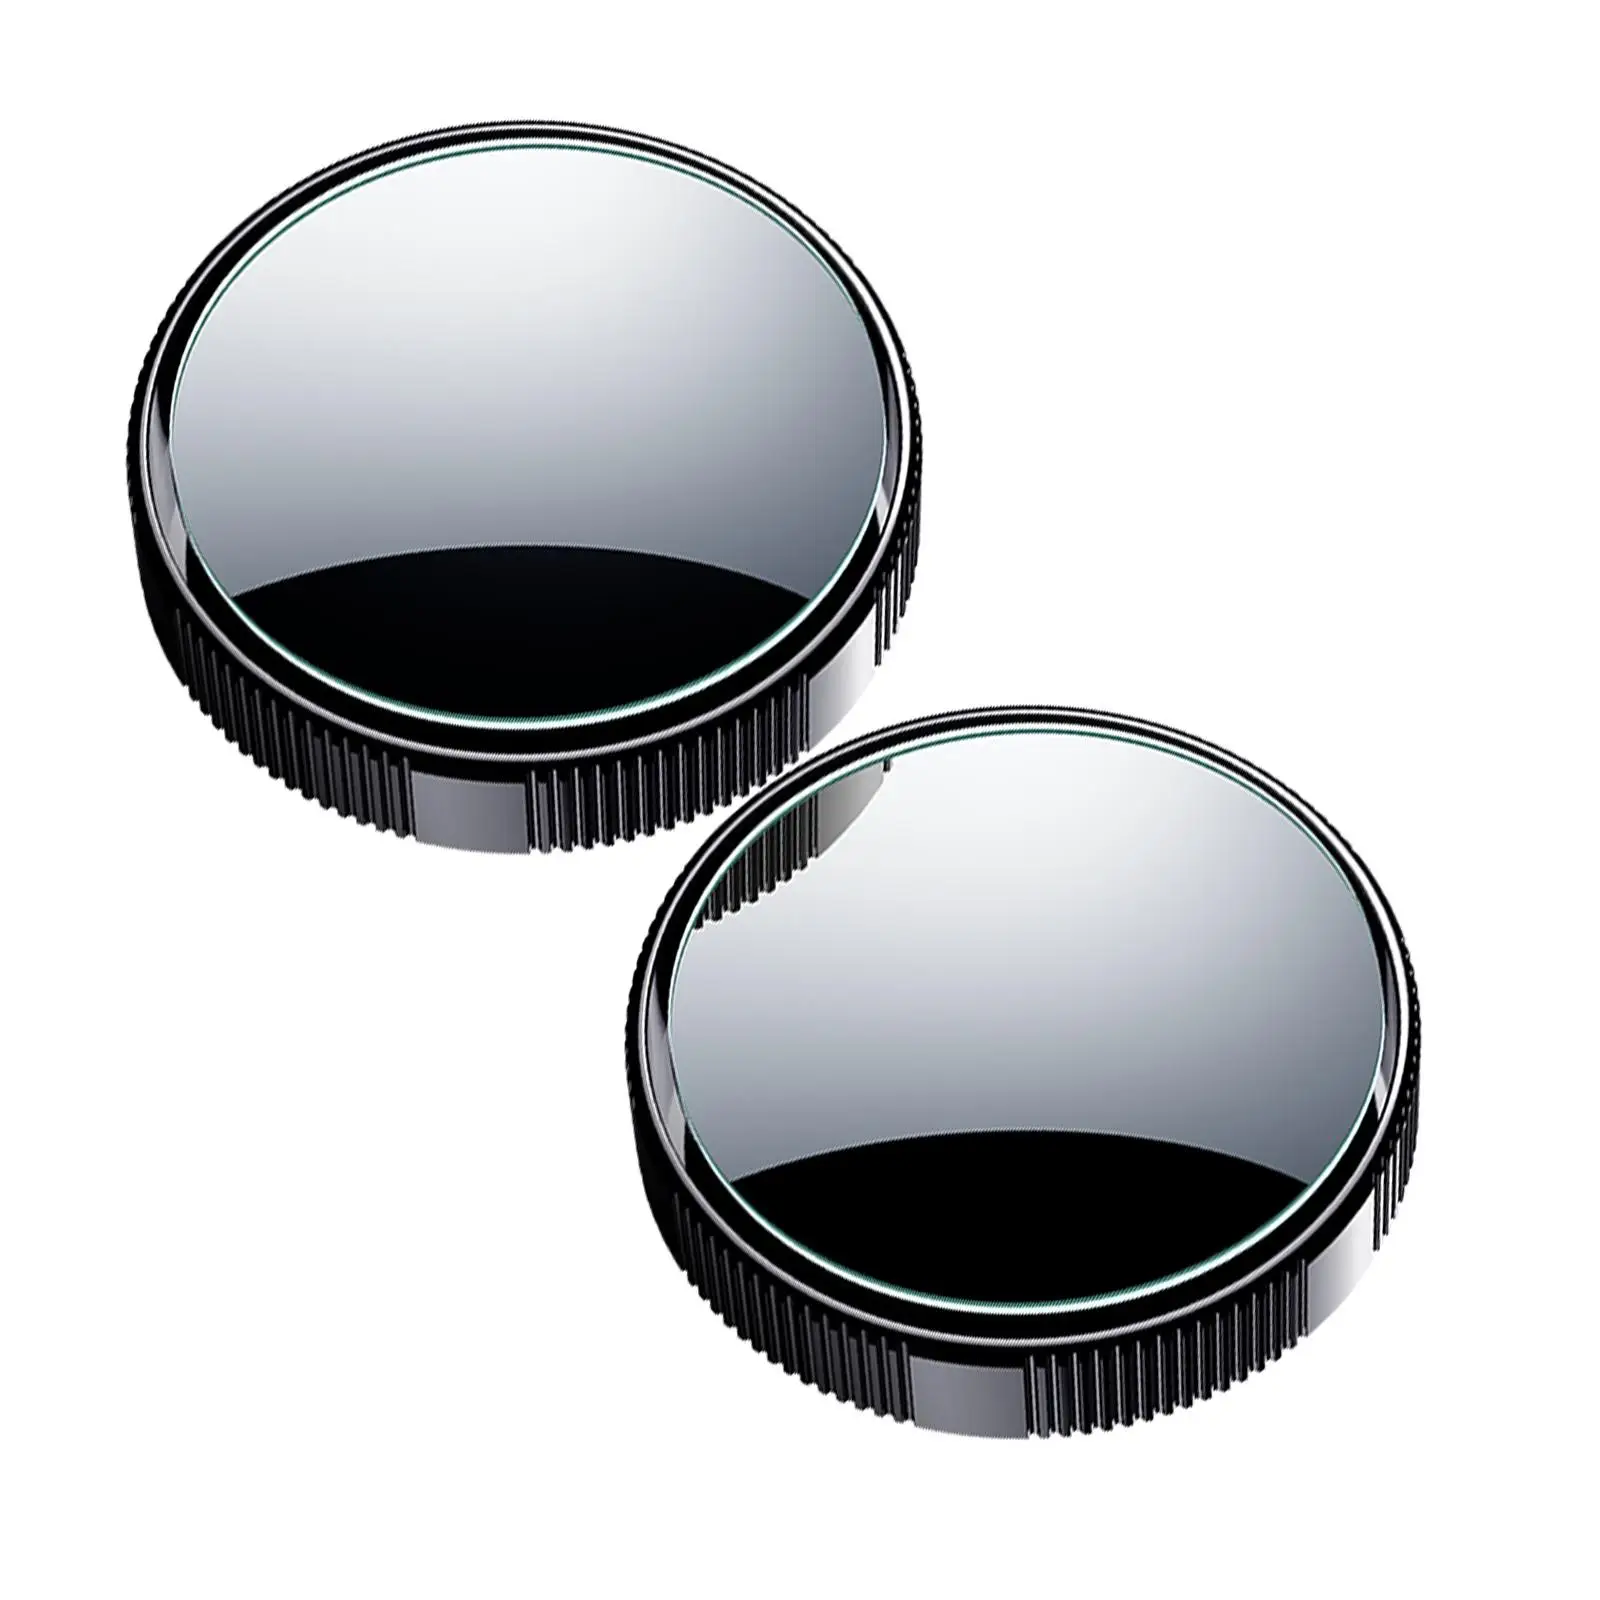 2 Pieces Round Blind Spot Mirrors Adjustable HD Glass Rearview Mirror Convex Mirror for Cars Motorcycles Trucks Accessories